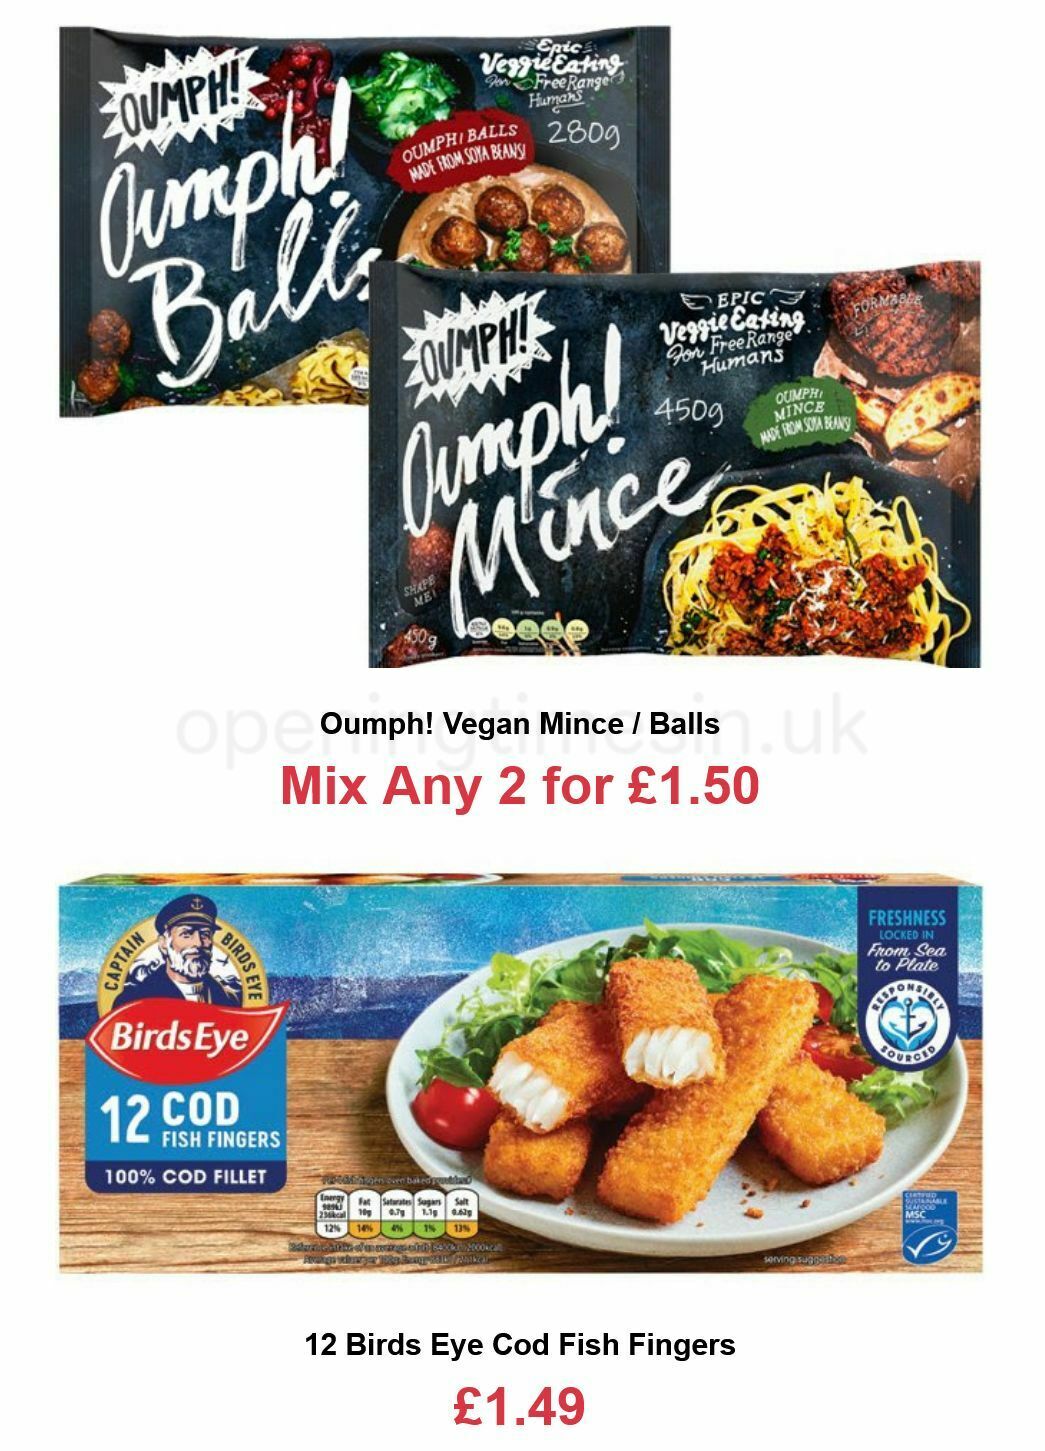 Farmfoods Offers from January 5